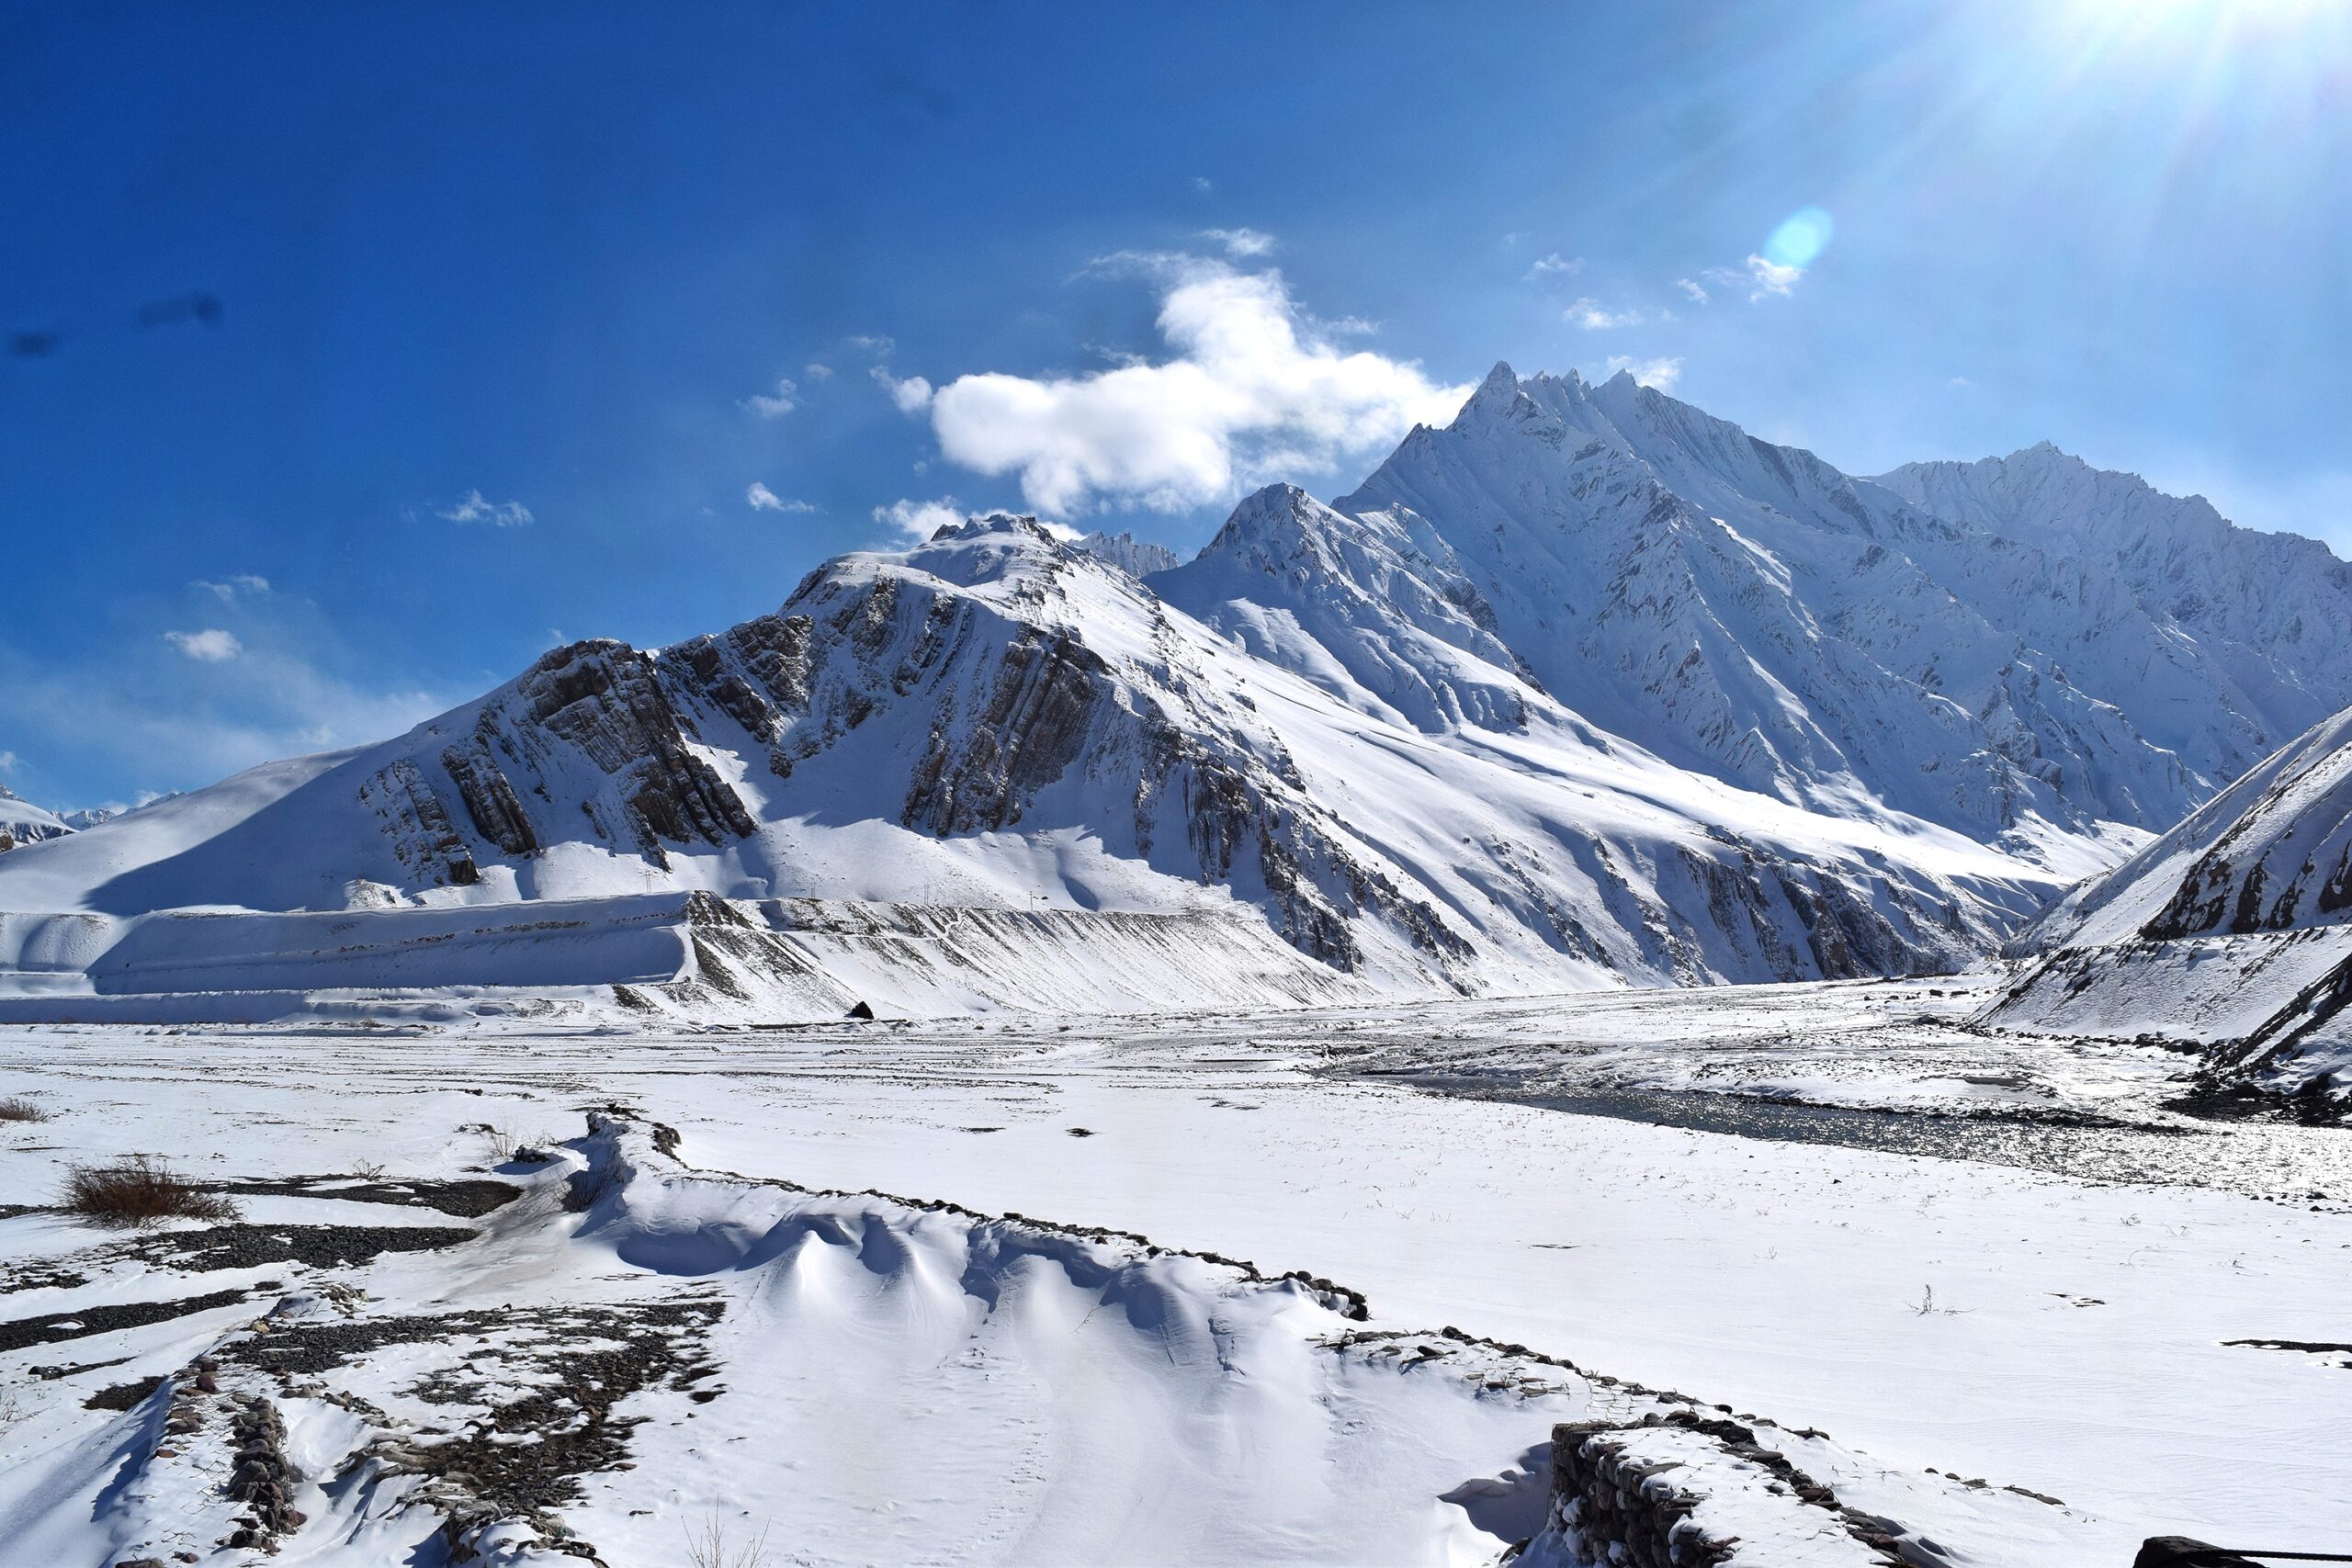 LADAKH: A Journey to a Land of Cold Desert